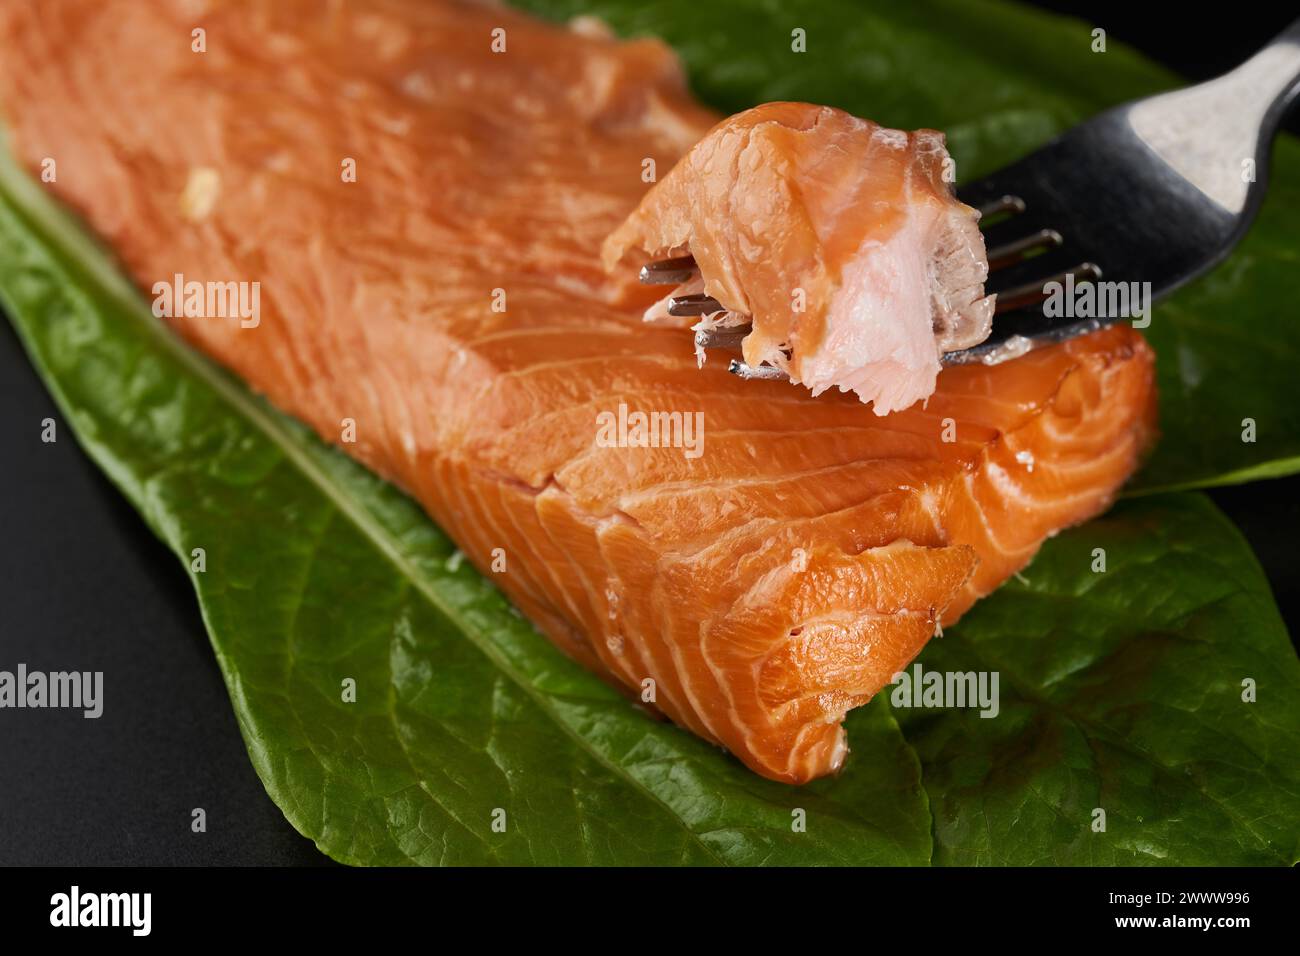 Smoked salmon on lettuce leaves in closeup over black background Stock Photo